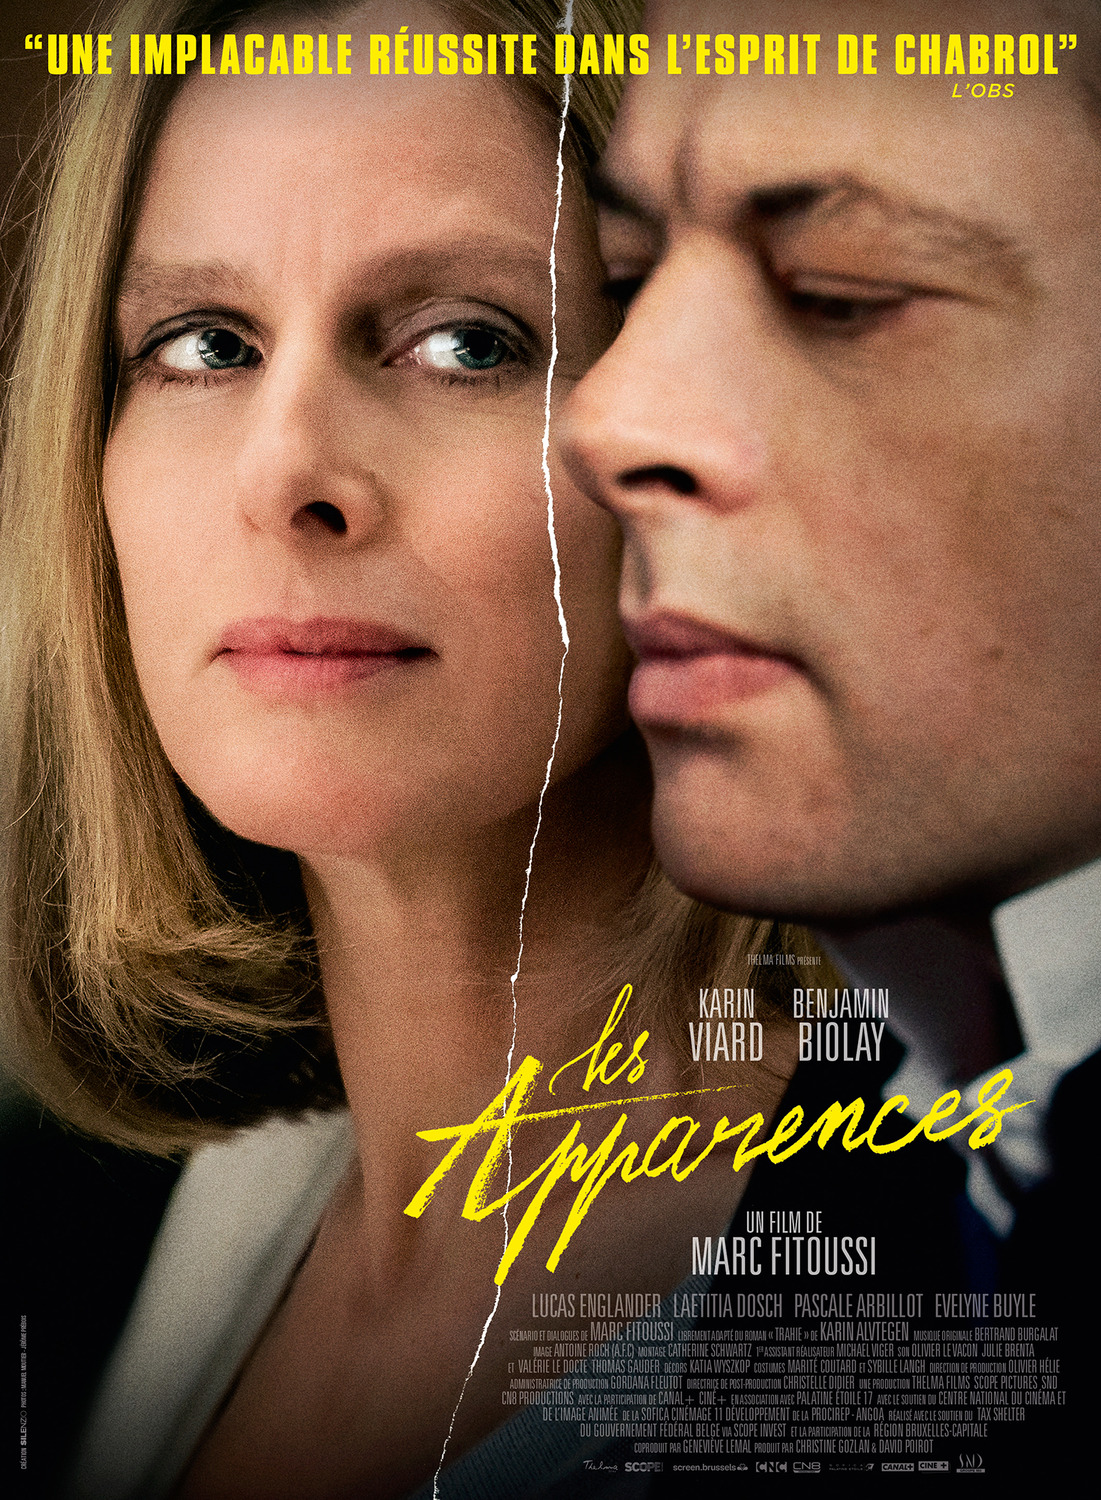 Extra Large Movie Poster Image for Les apparences 